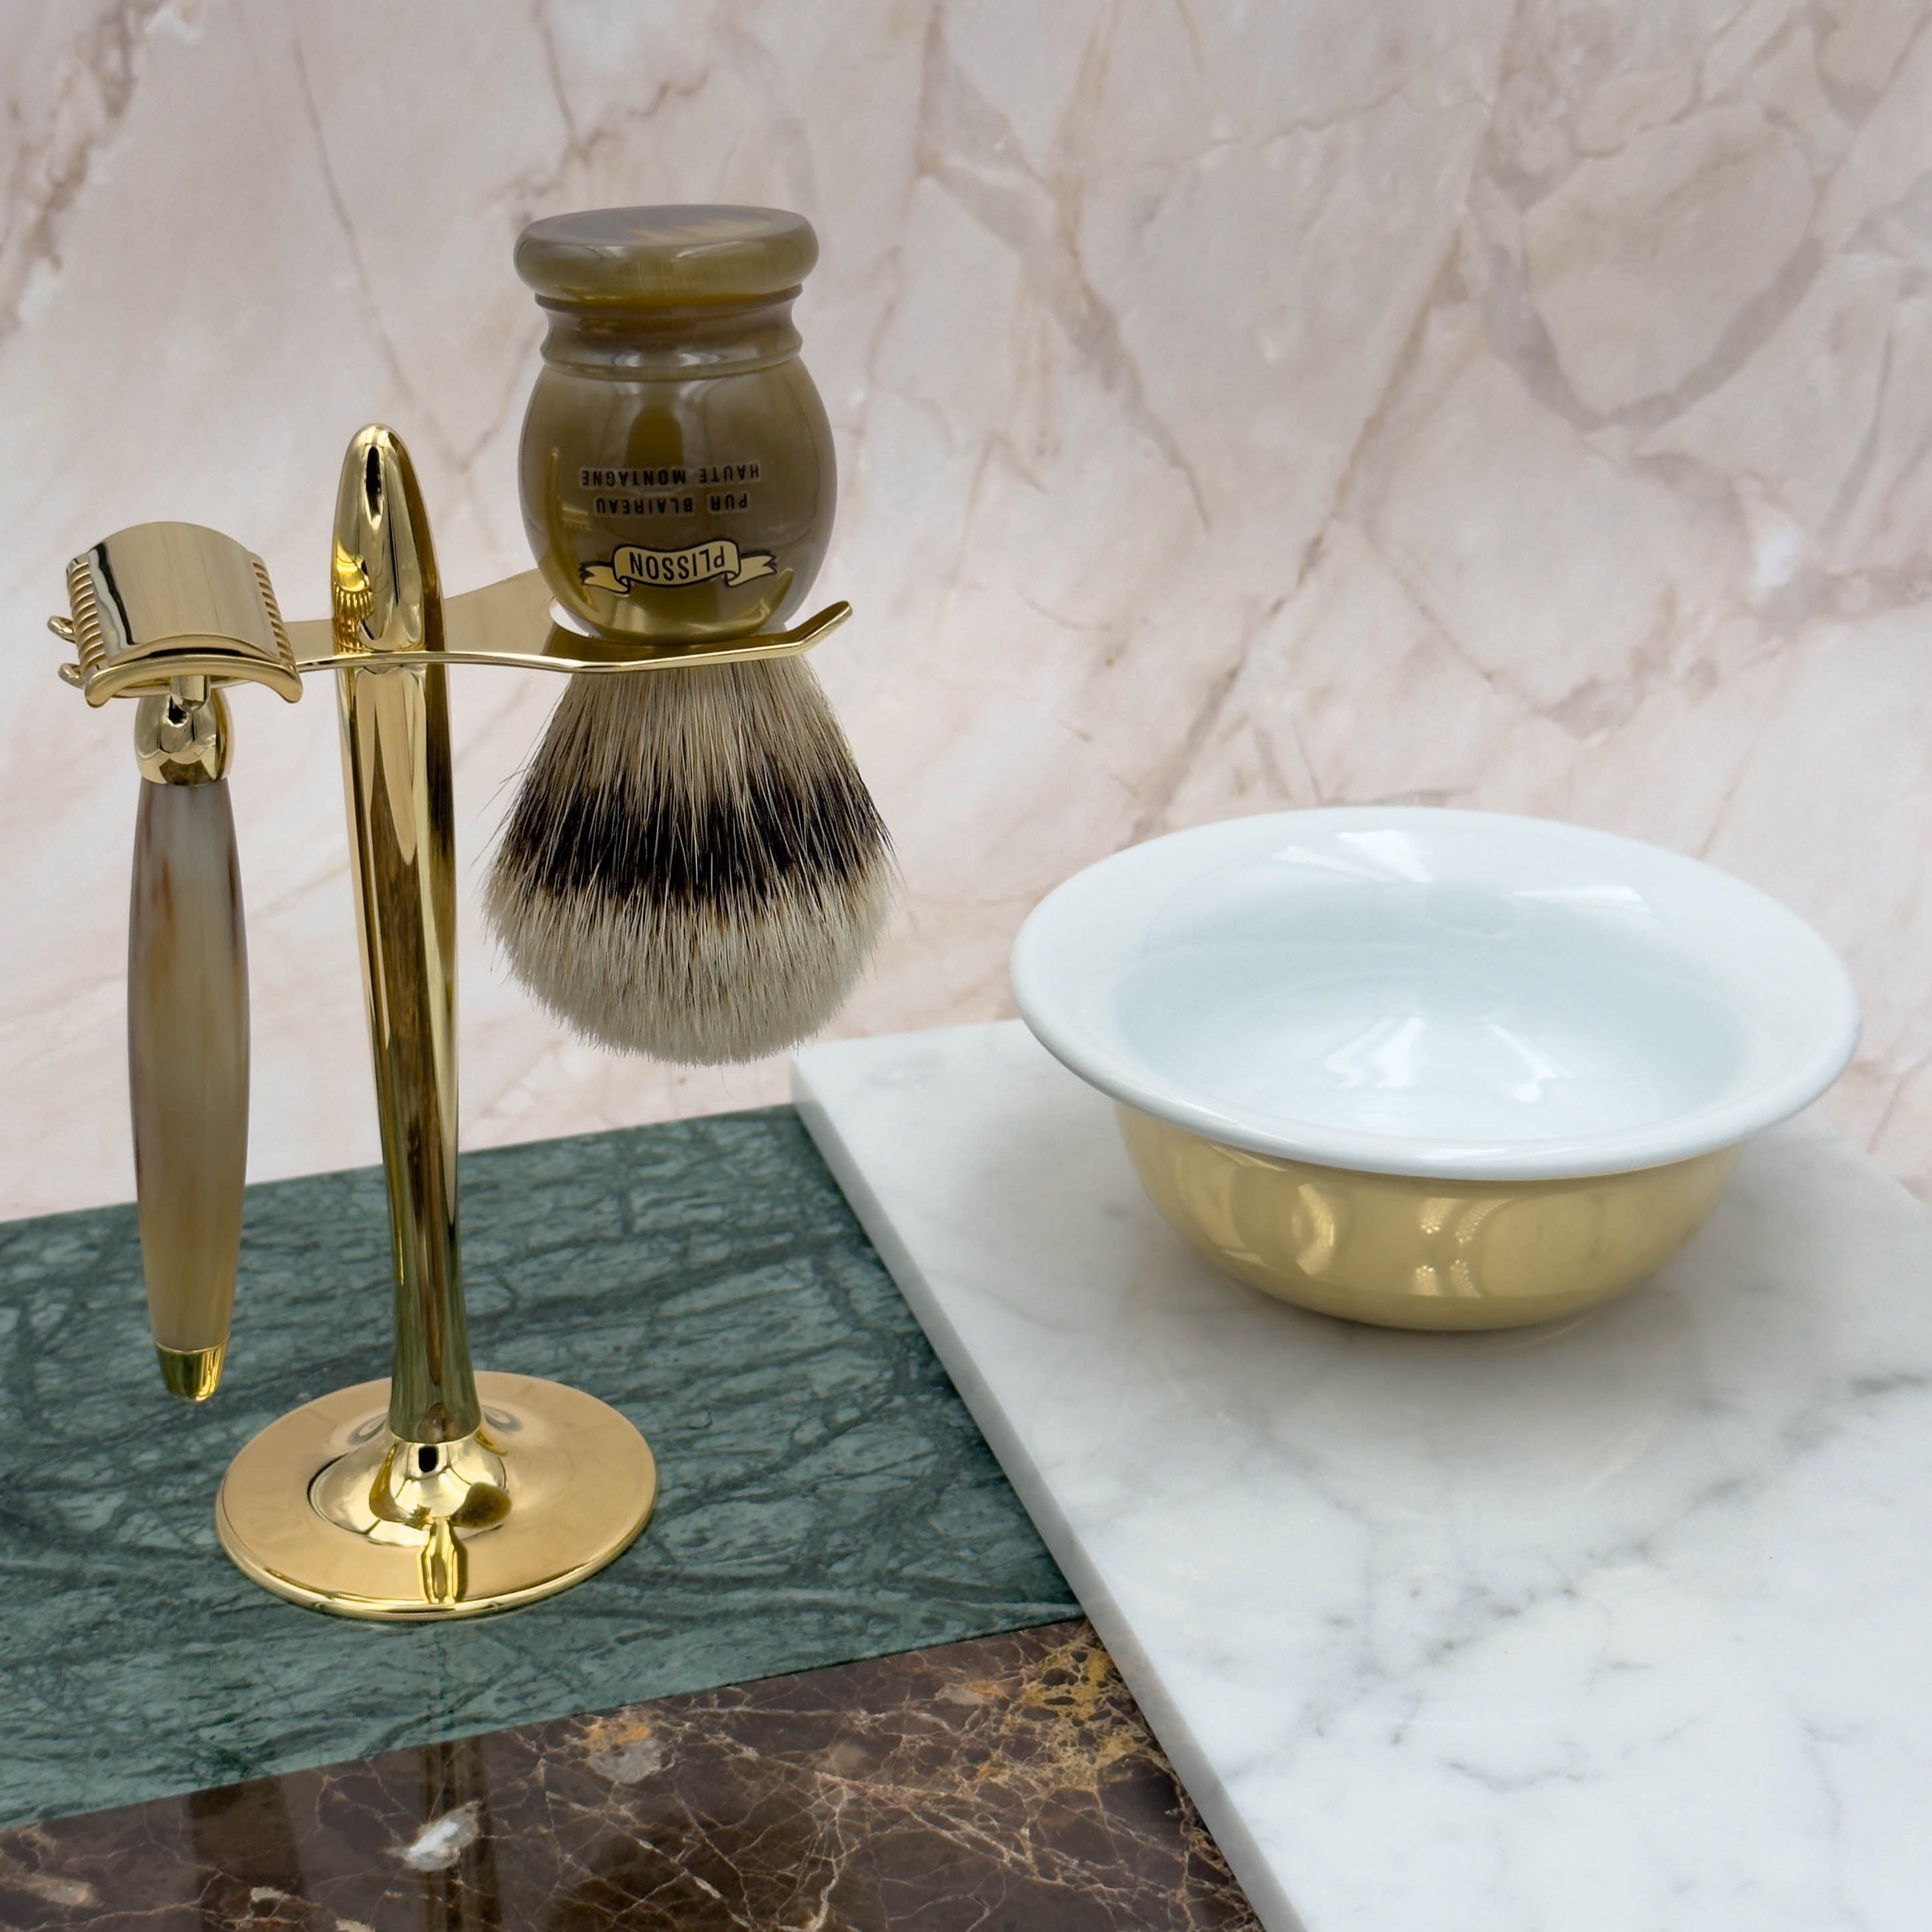 Display on marble of bowl and shaving accessories